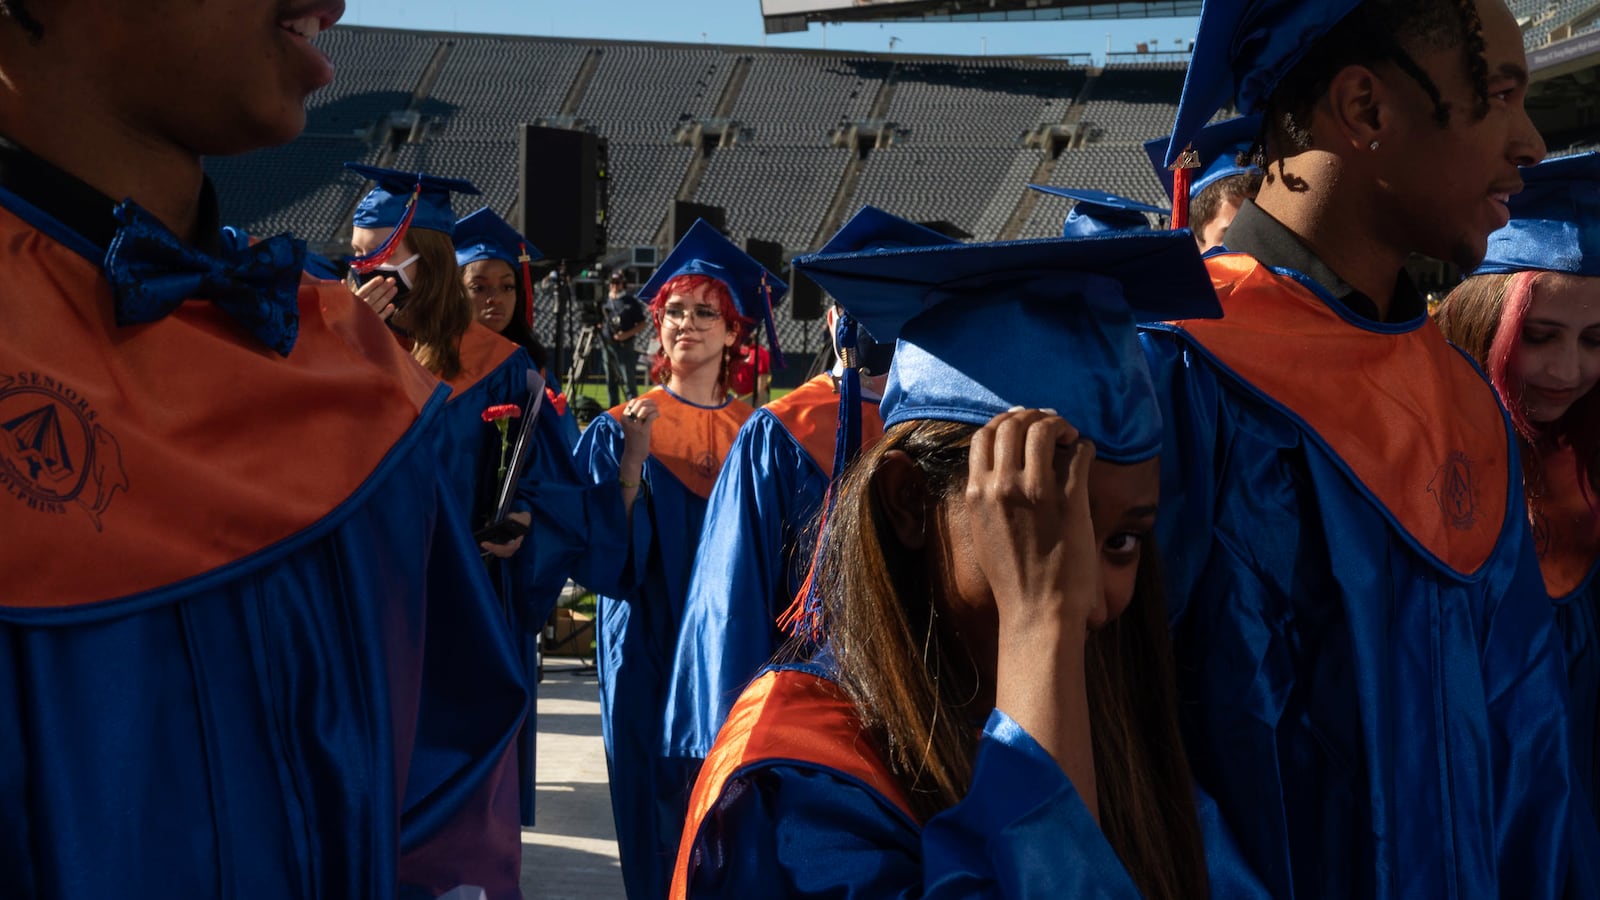 Several recently graduated students wearing blue and orange caps and gowns make their way off of a stadium field at the conclusion of their ceremony.